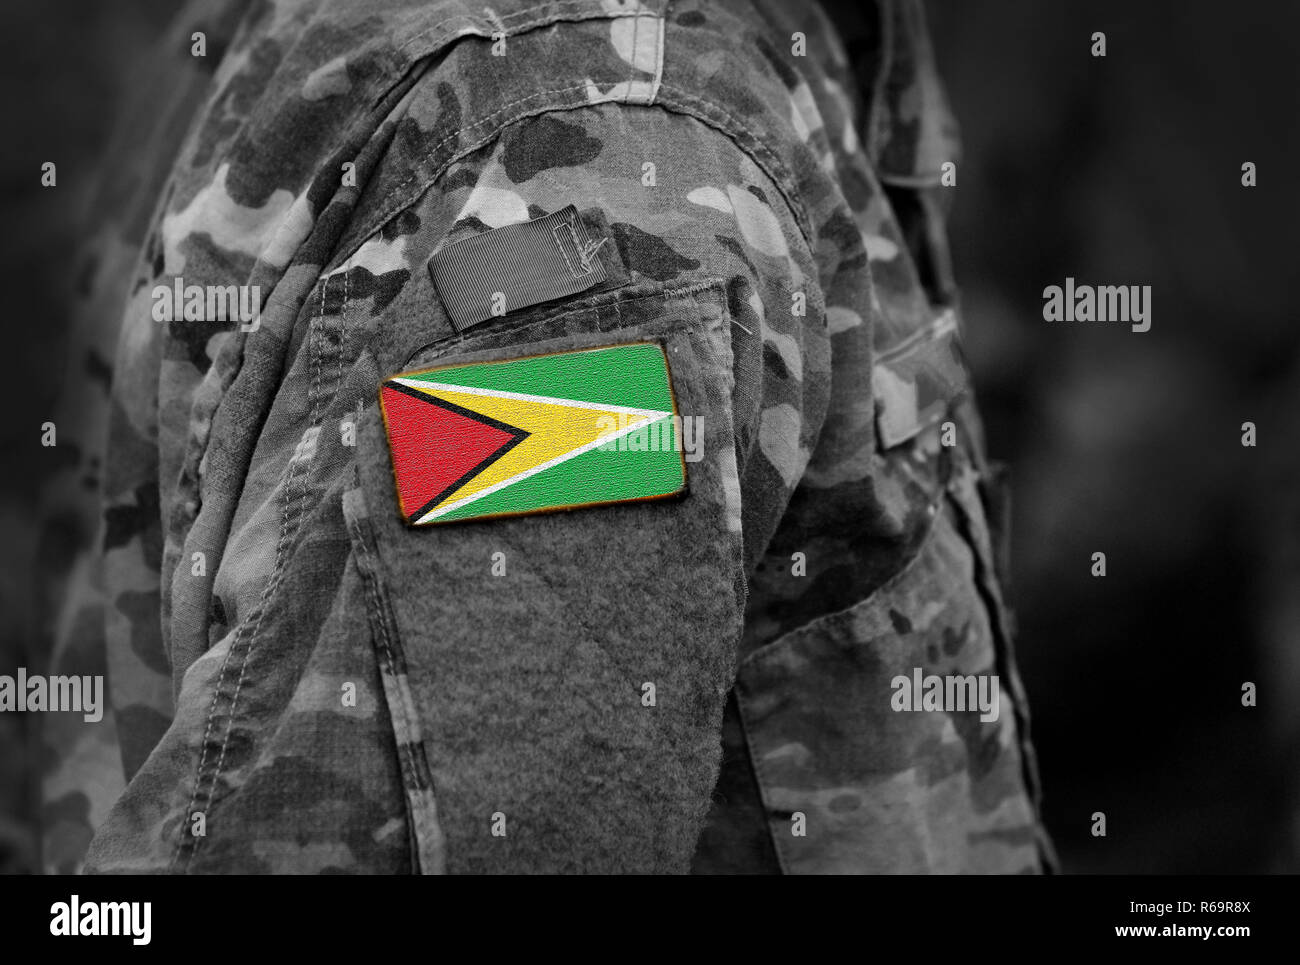 Flag of Guyana on soldiers arm. Co-operative Republic of Guyana flag.  Army, troops, military, Africa (collage). Stock Photo